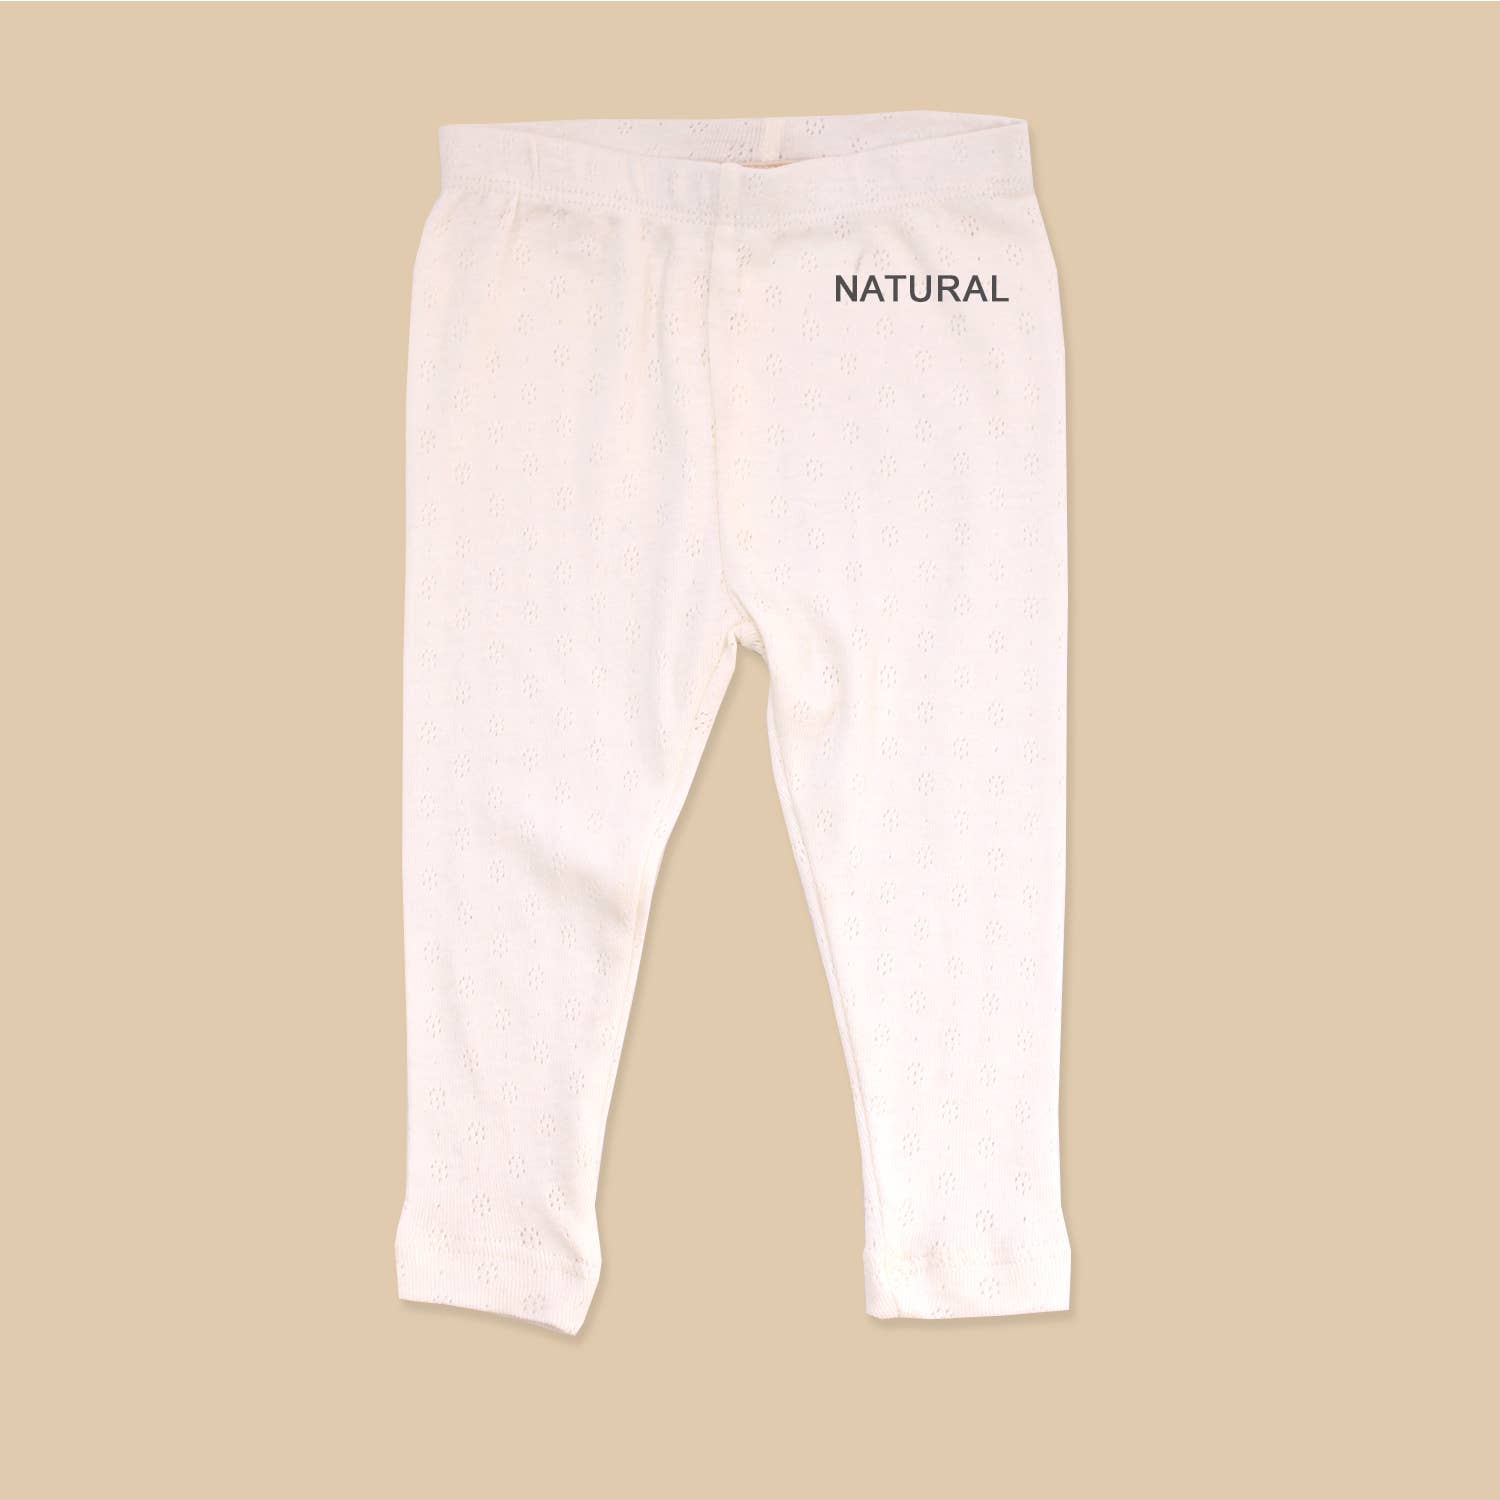 Wrap your little one in the ultimate comfort of our Knit Baby Legging Pants made from organic cotton. This ultra-soft and lightweight fabric is perfect for all seasons, and the adorable pattern adds a touch of cuteness. Keep your baby comfortable and stylish with these must-have leggings!  Machine wash and dry, durable and long lasting. Chemical free & non-toxic formulation, eco-friendly & sustainable. Ethically produced in India from small farmer sourced cotton. 